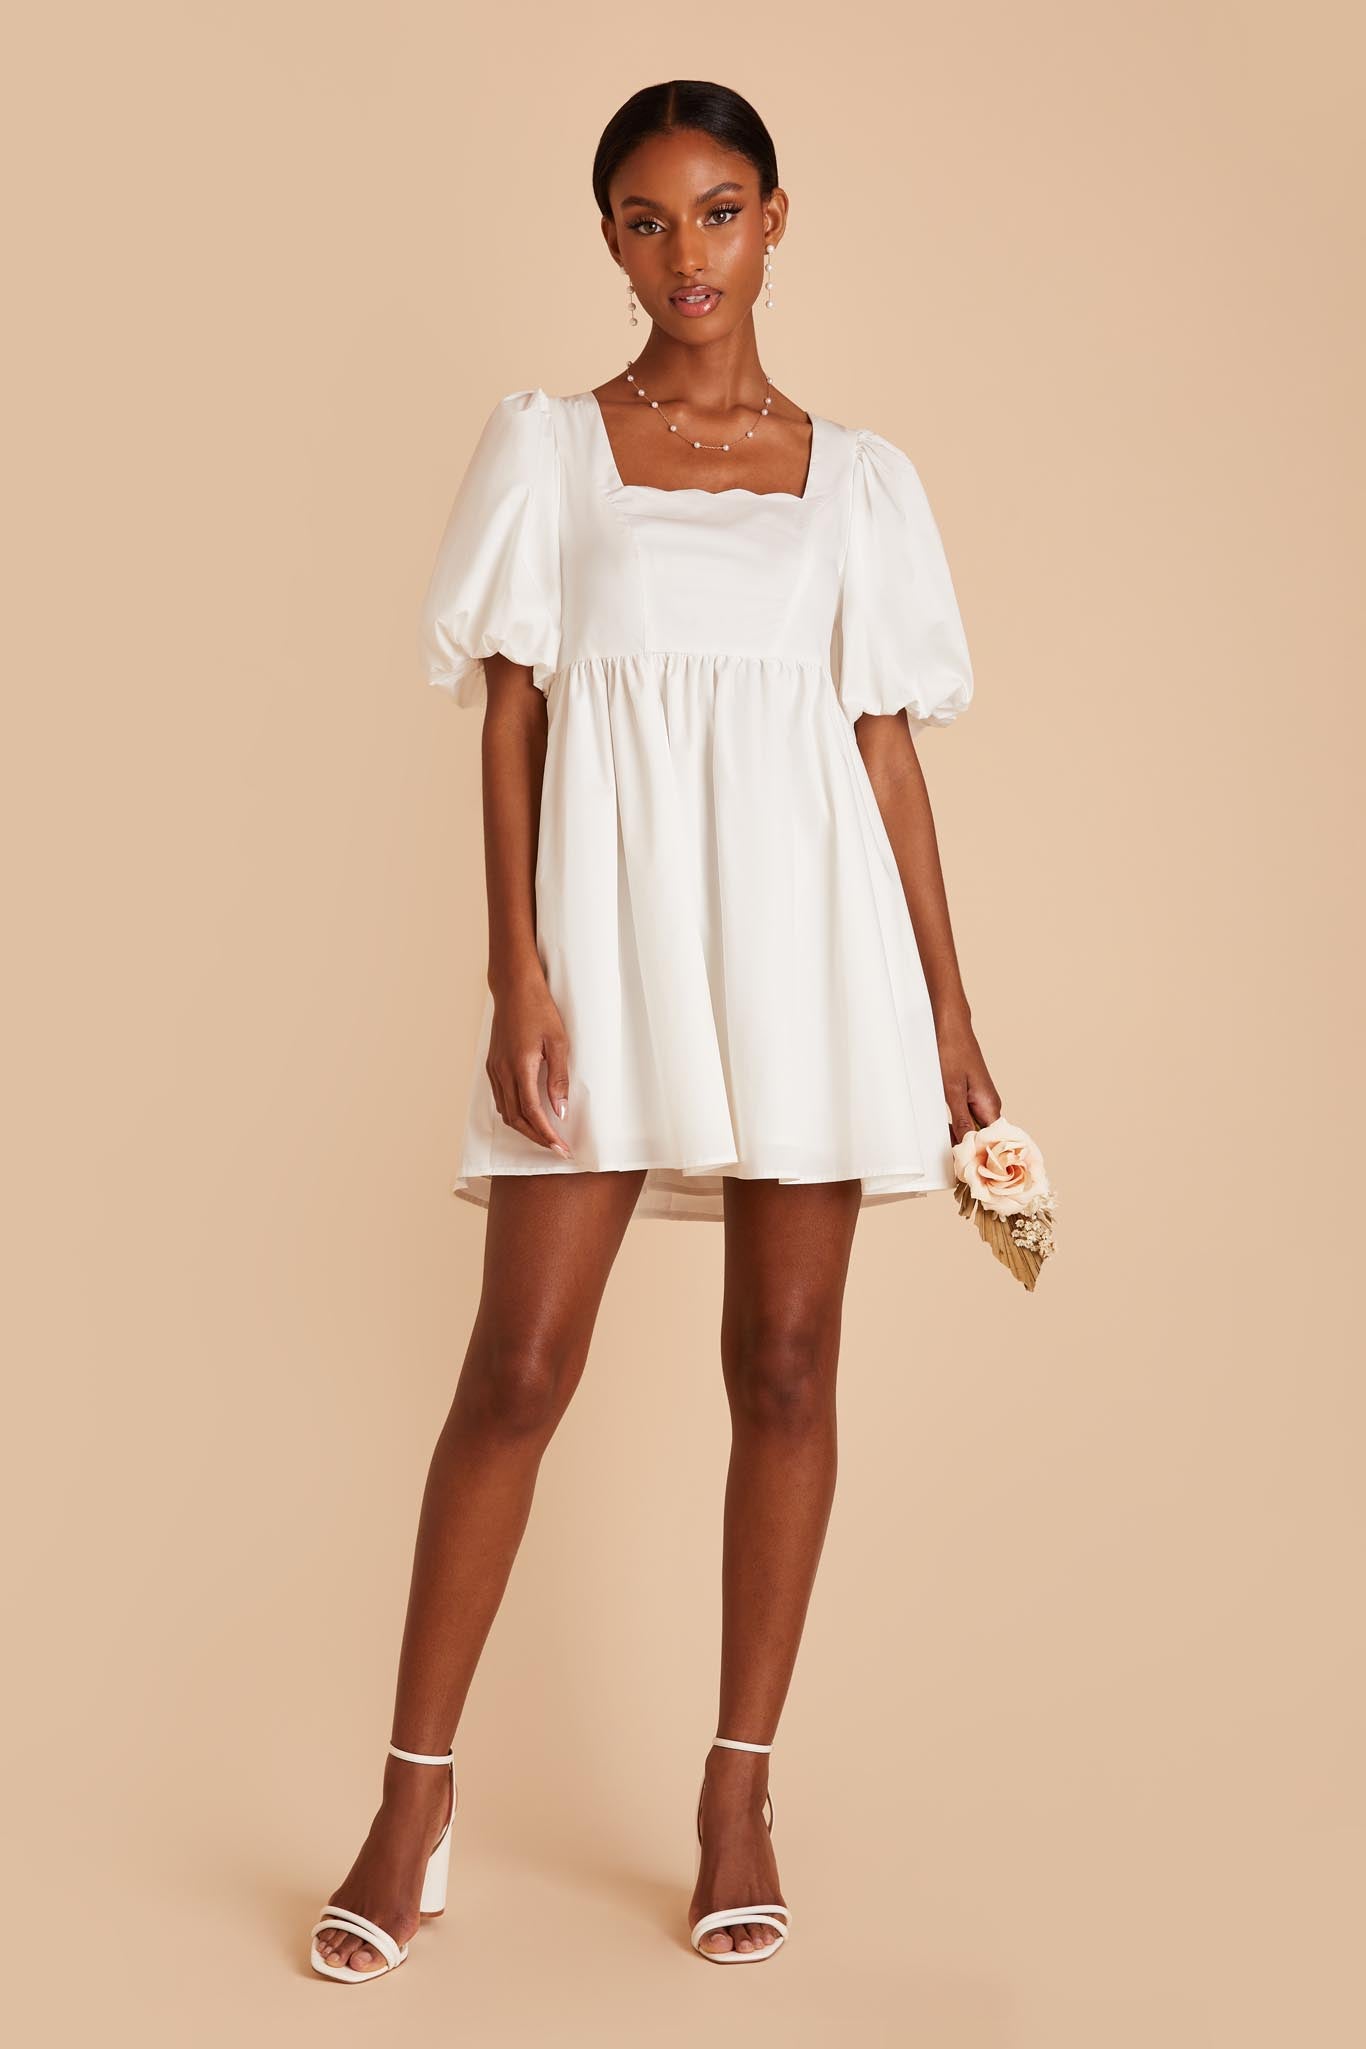 White Mini Dress with Short Balloon Sleeves and Scalloped Neckline by Birdy Grey